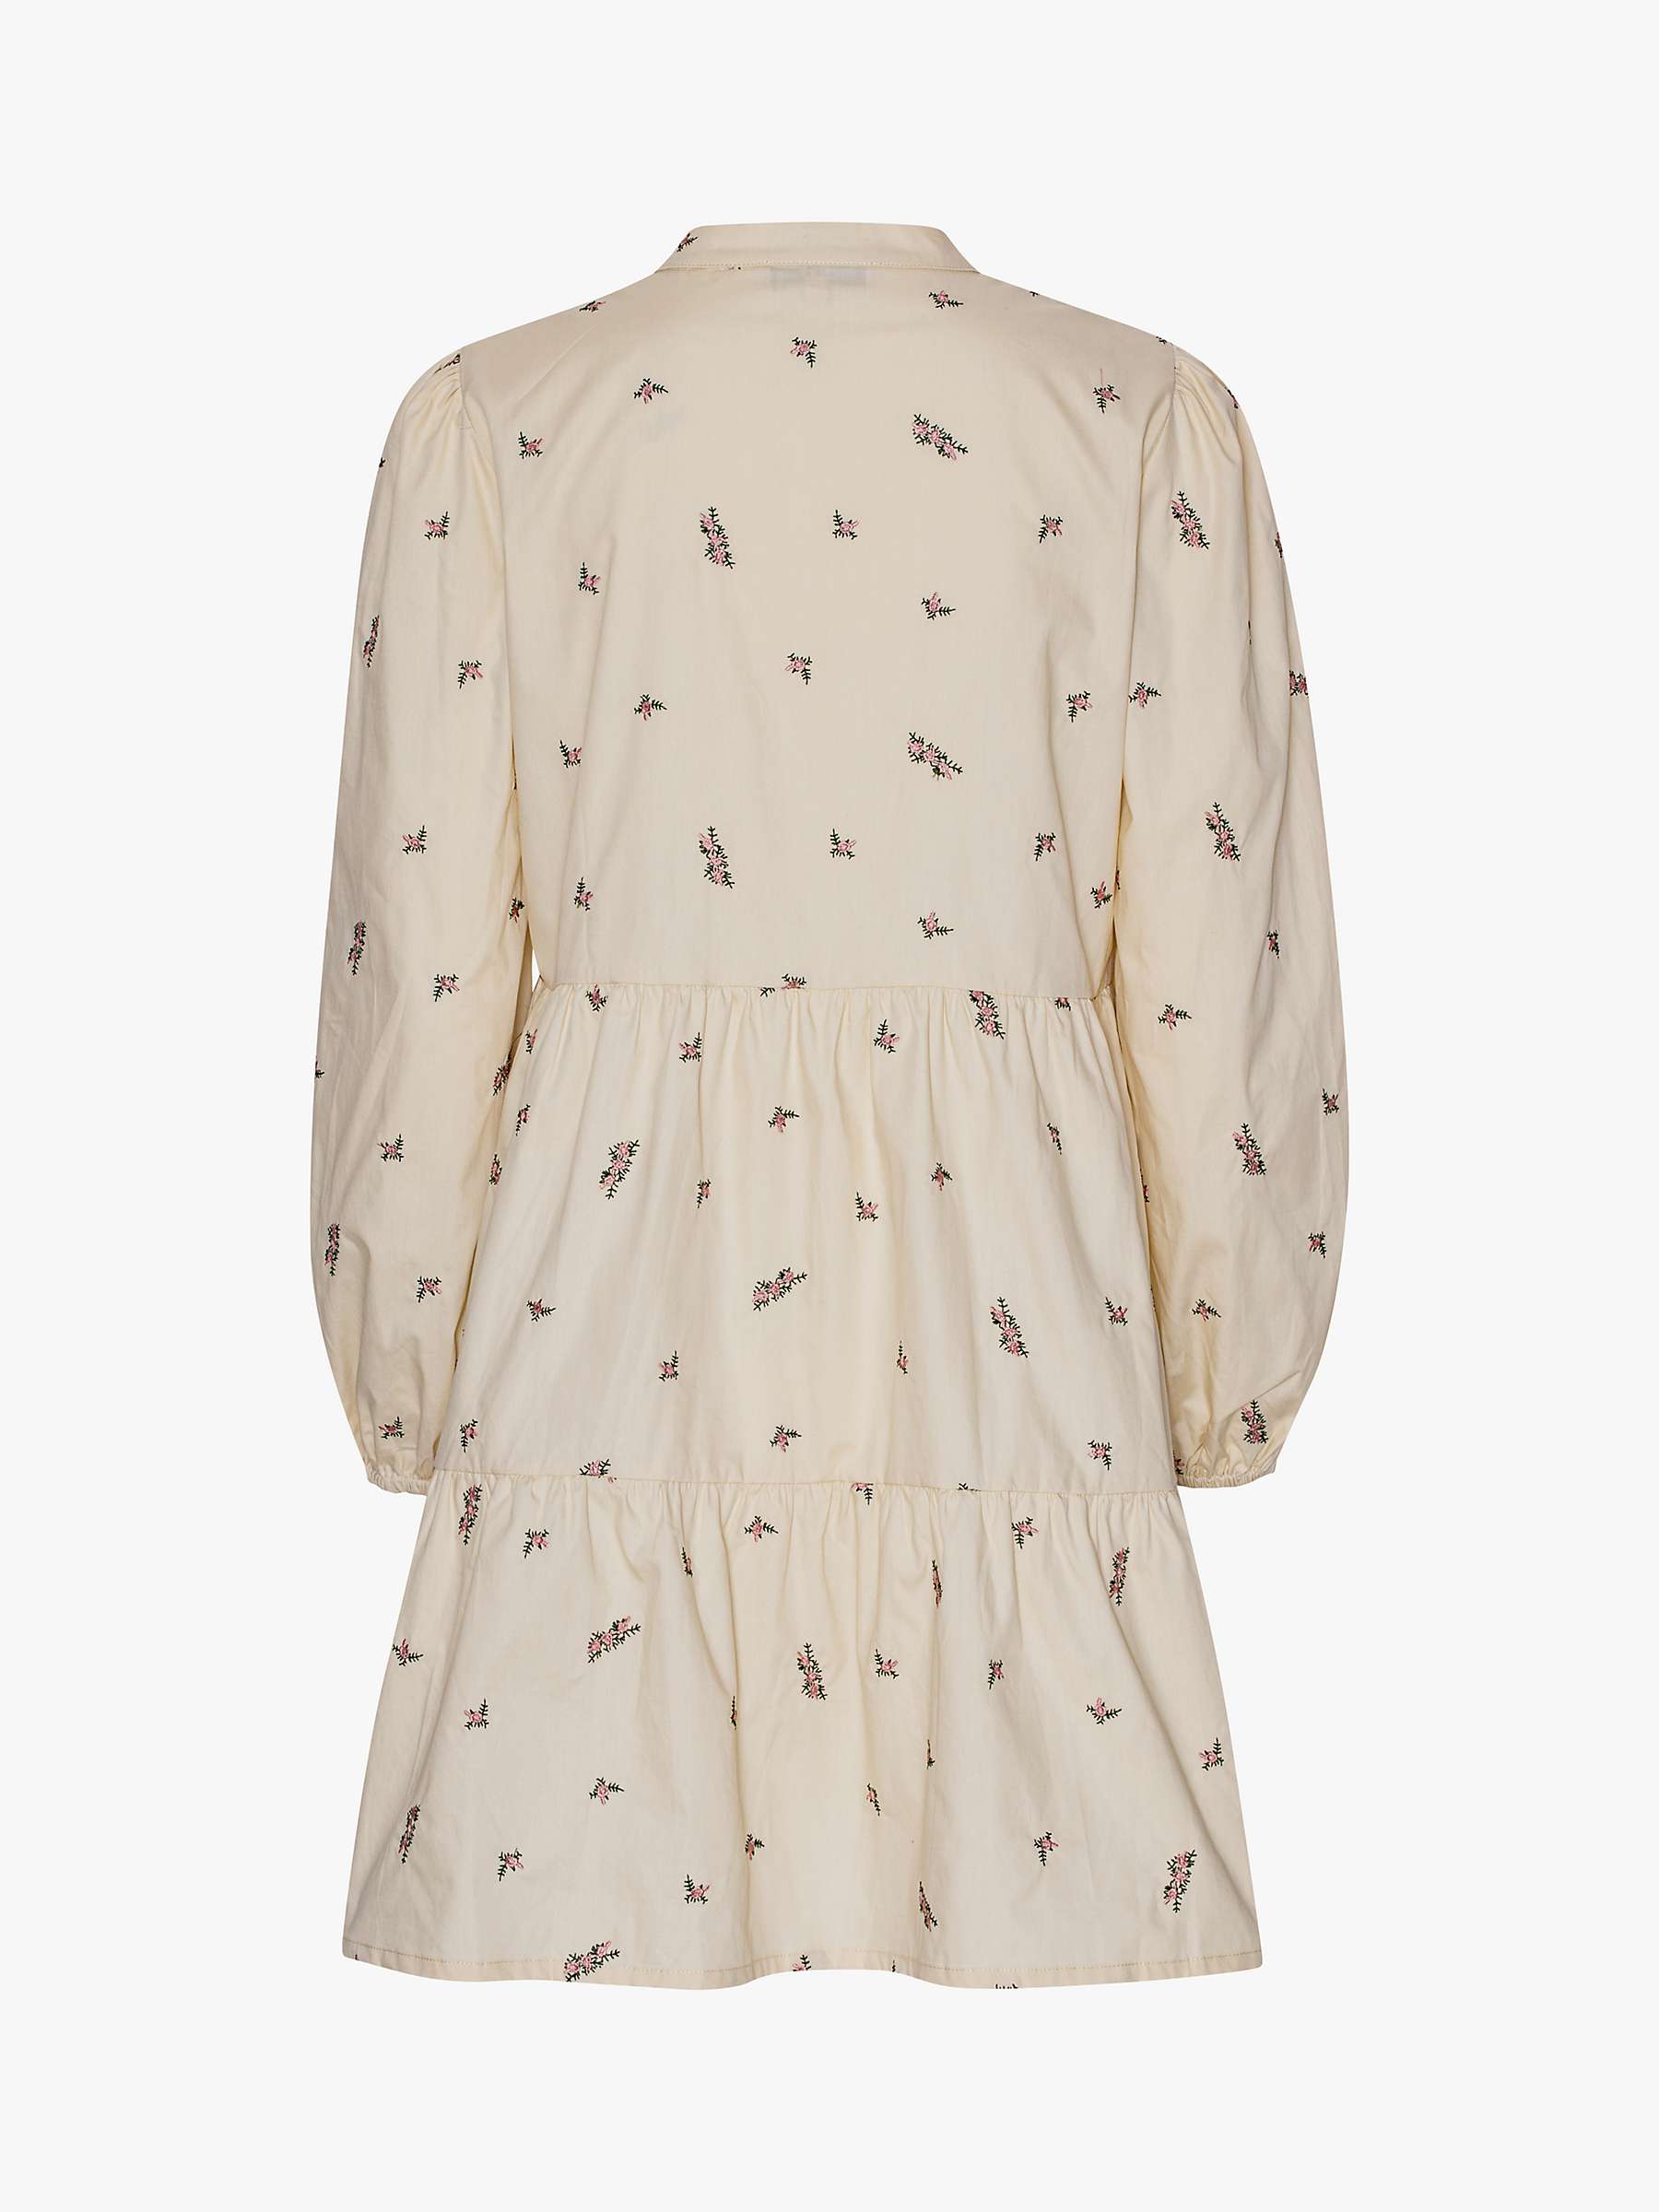 Buy A-VIEW Karma Embroidered Mini Dress, 004 Sand Online at johnlewis.com